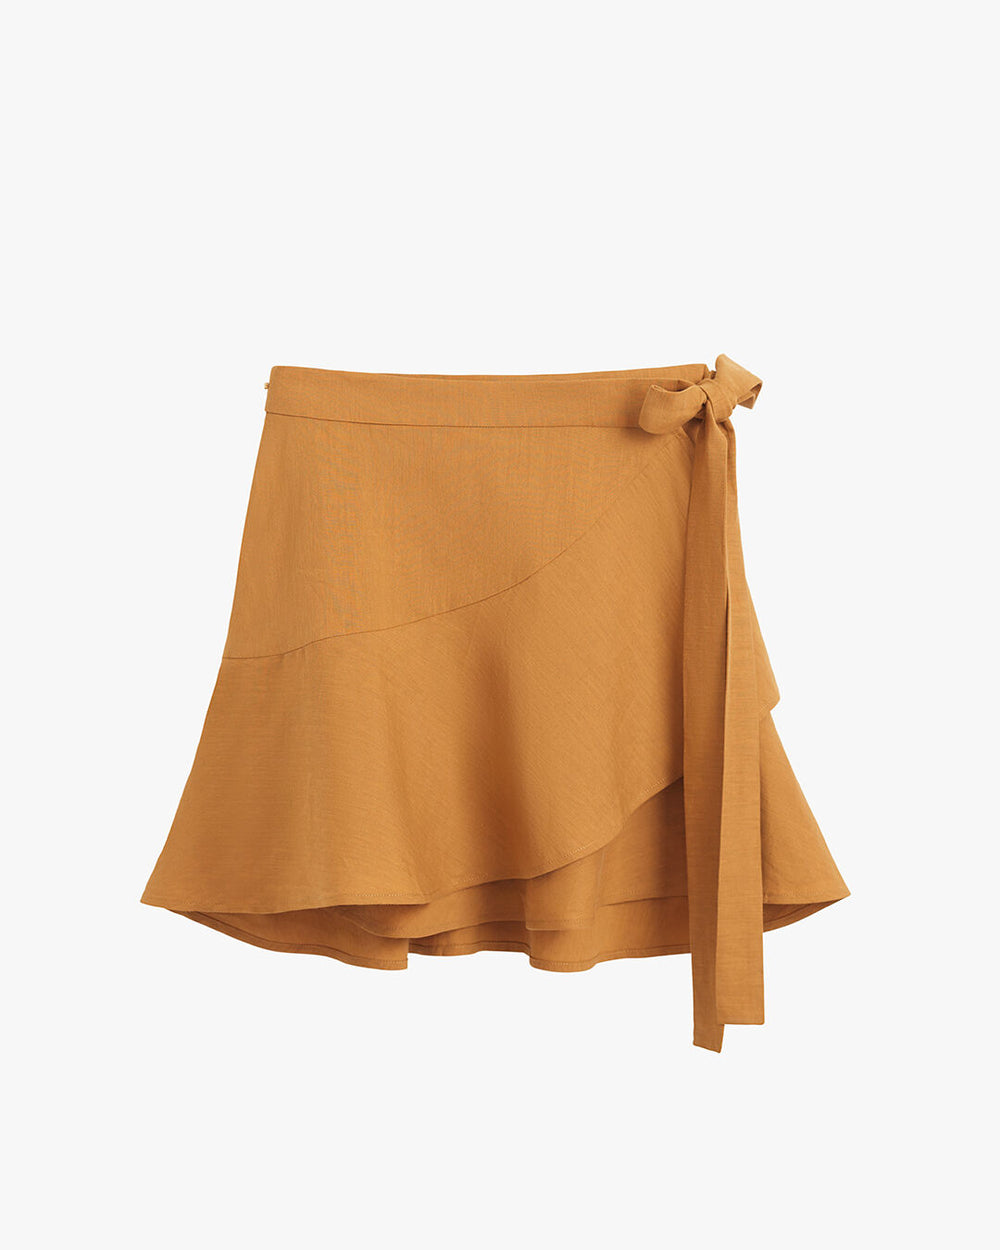 Linen Wrap Skirt - Our Second Nature